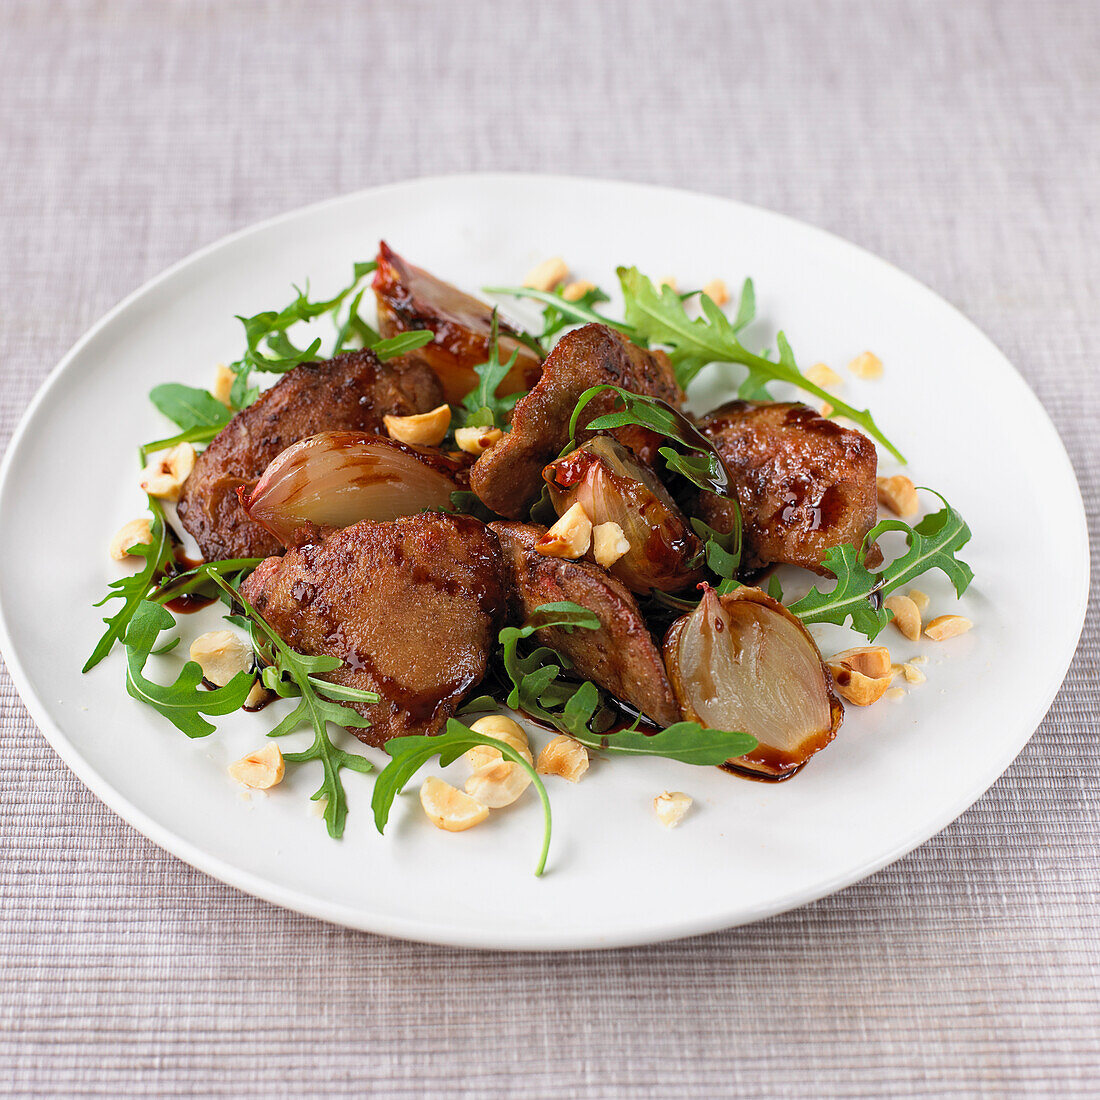 Chicken livers with shallots and rocket